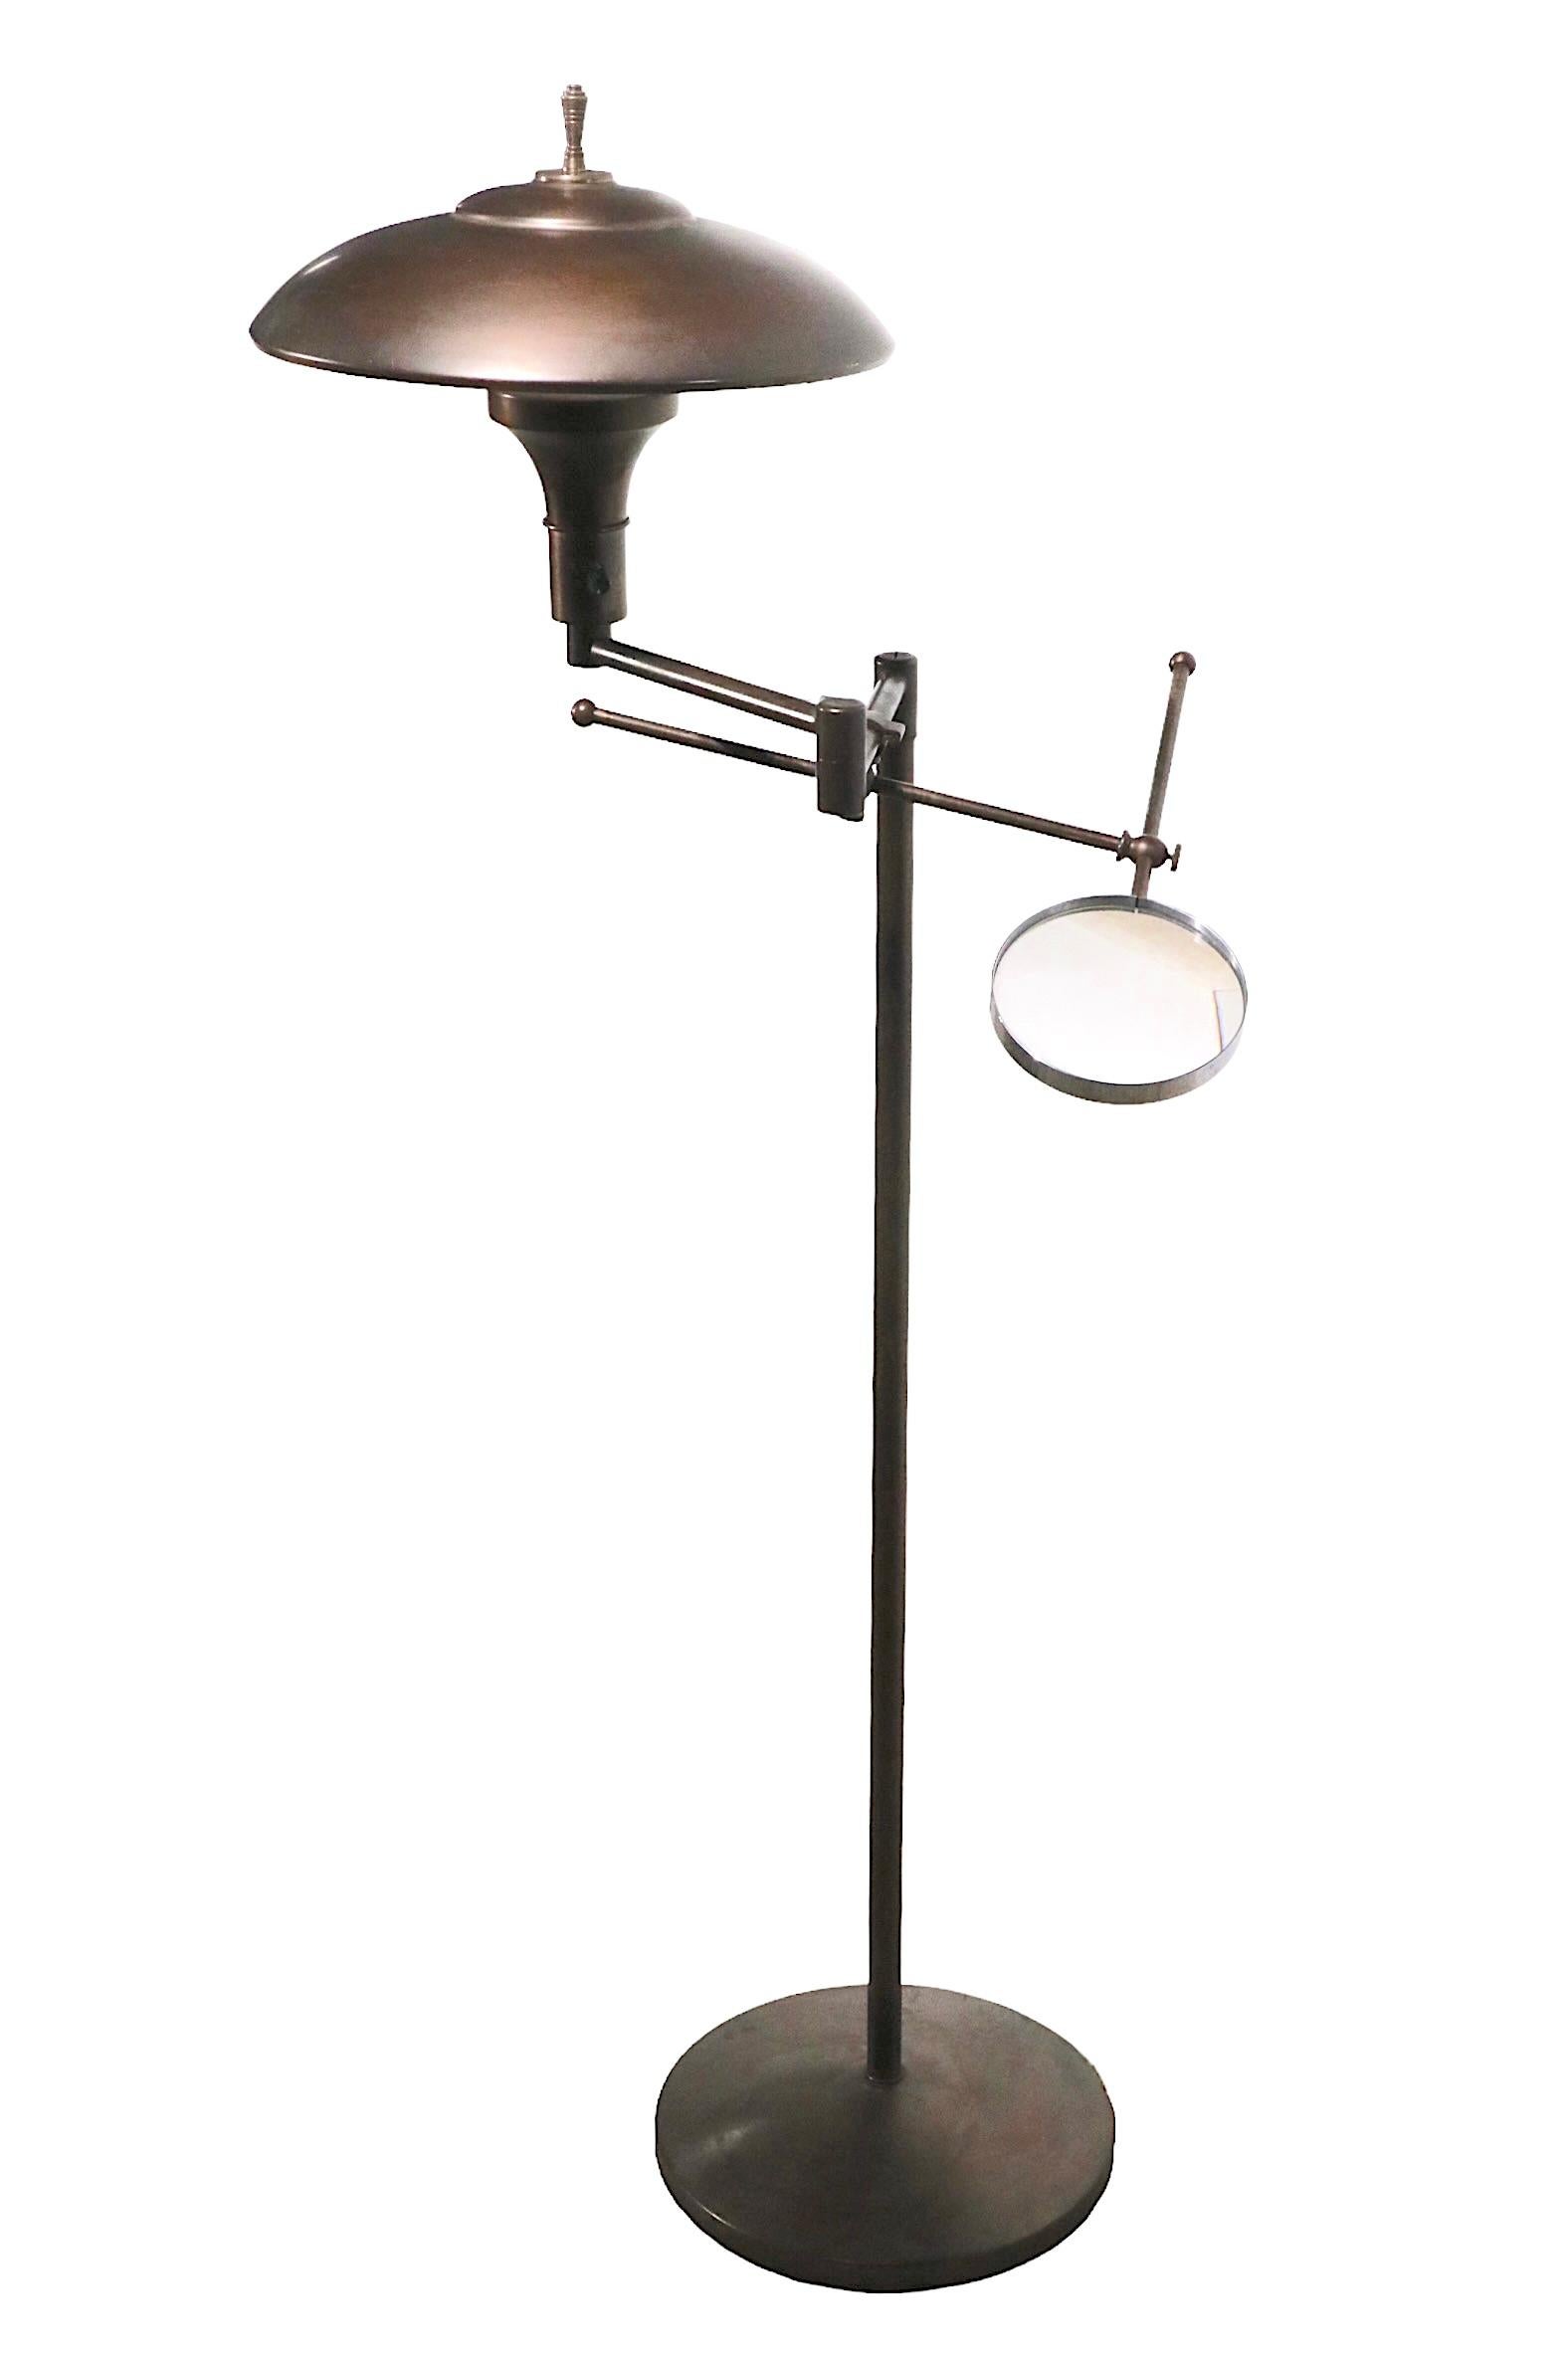 Adjustable Floor Lamp with Magnifying Glass, Faries Lamp Co. circa 1920-1940 For Sale 11